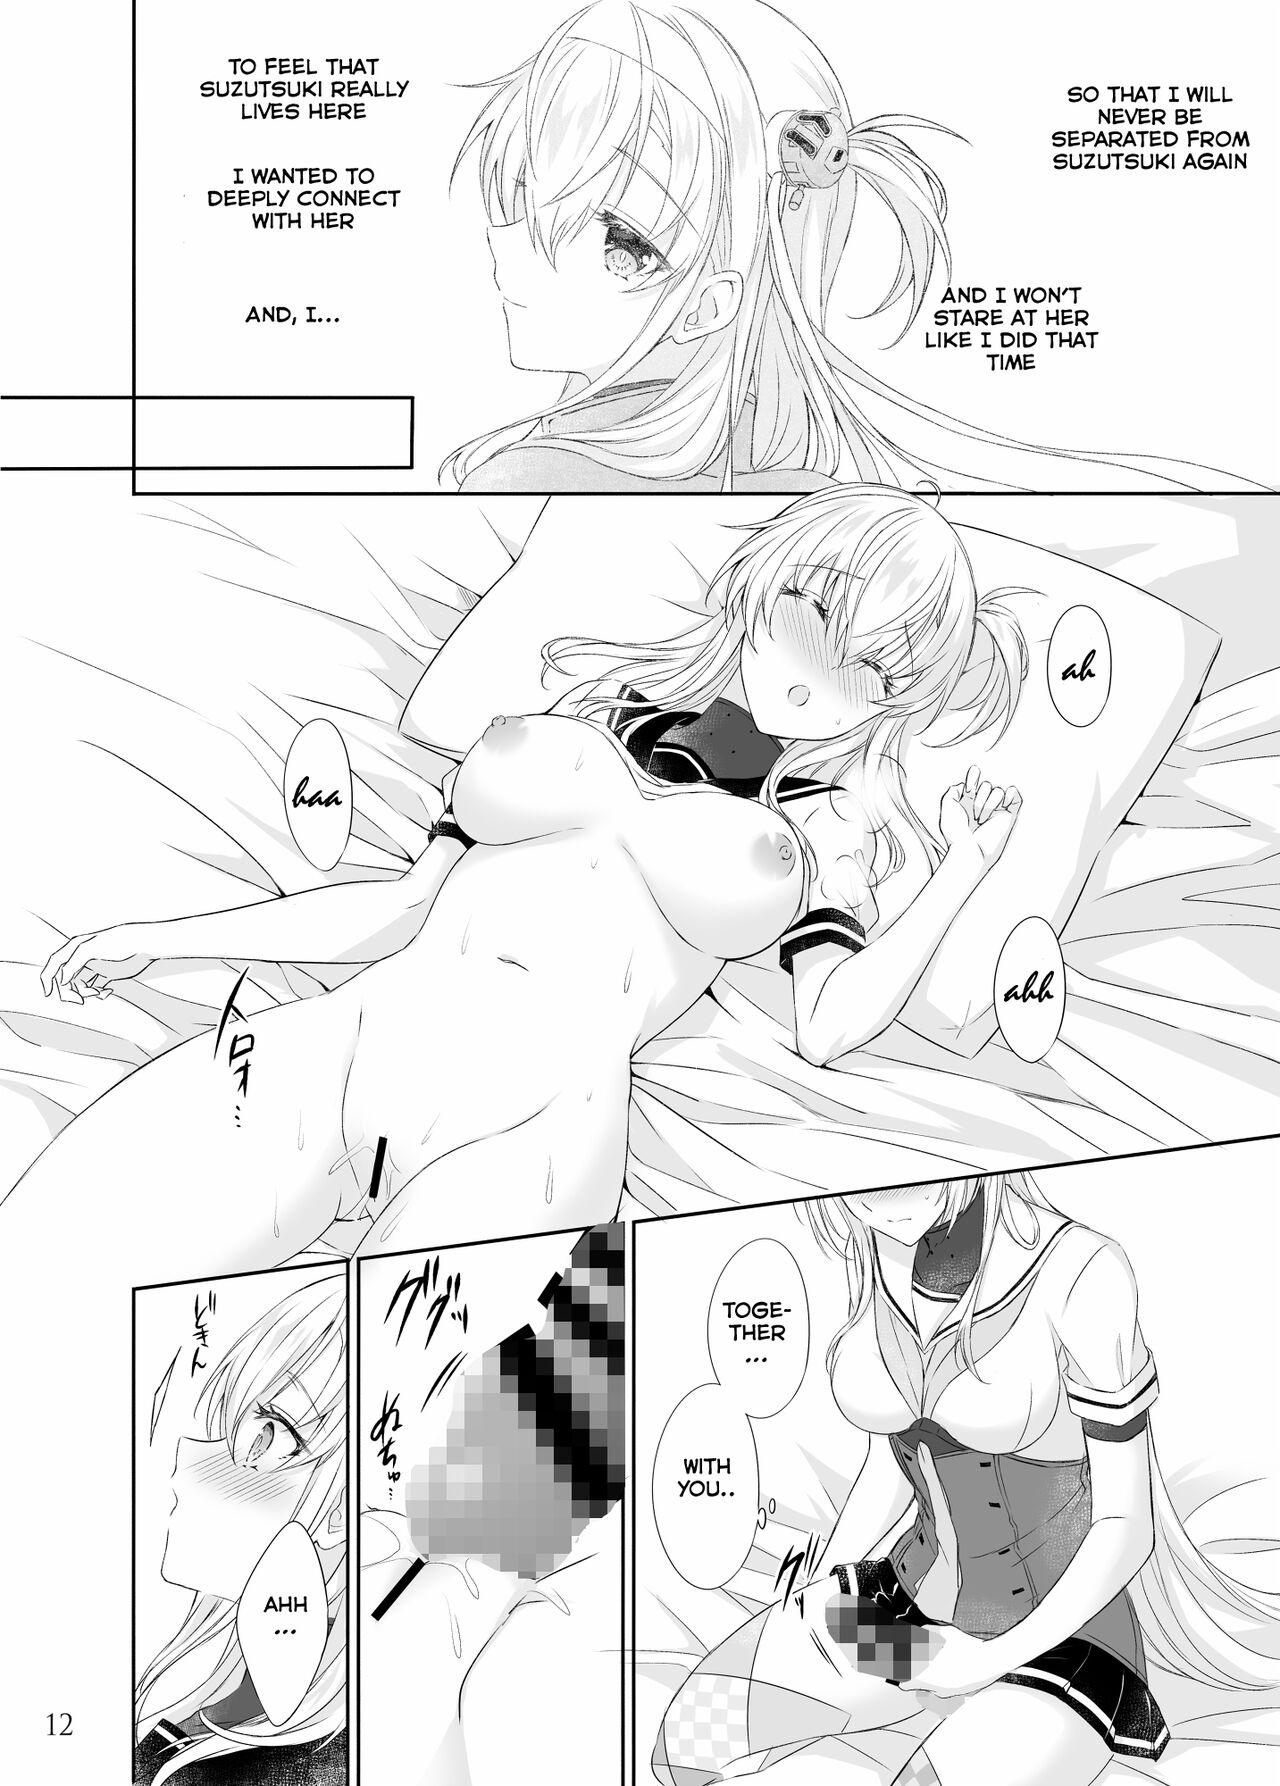 Stretching [my pace world (Kabocha Torte)] Gesshoku -end of Lament- | Lunar Eclipse -end of Lament- (Kantai Collection -KanColle-) [English] [Digital] - Kantai collection Juicy - Page 11